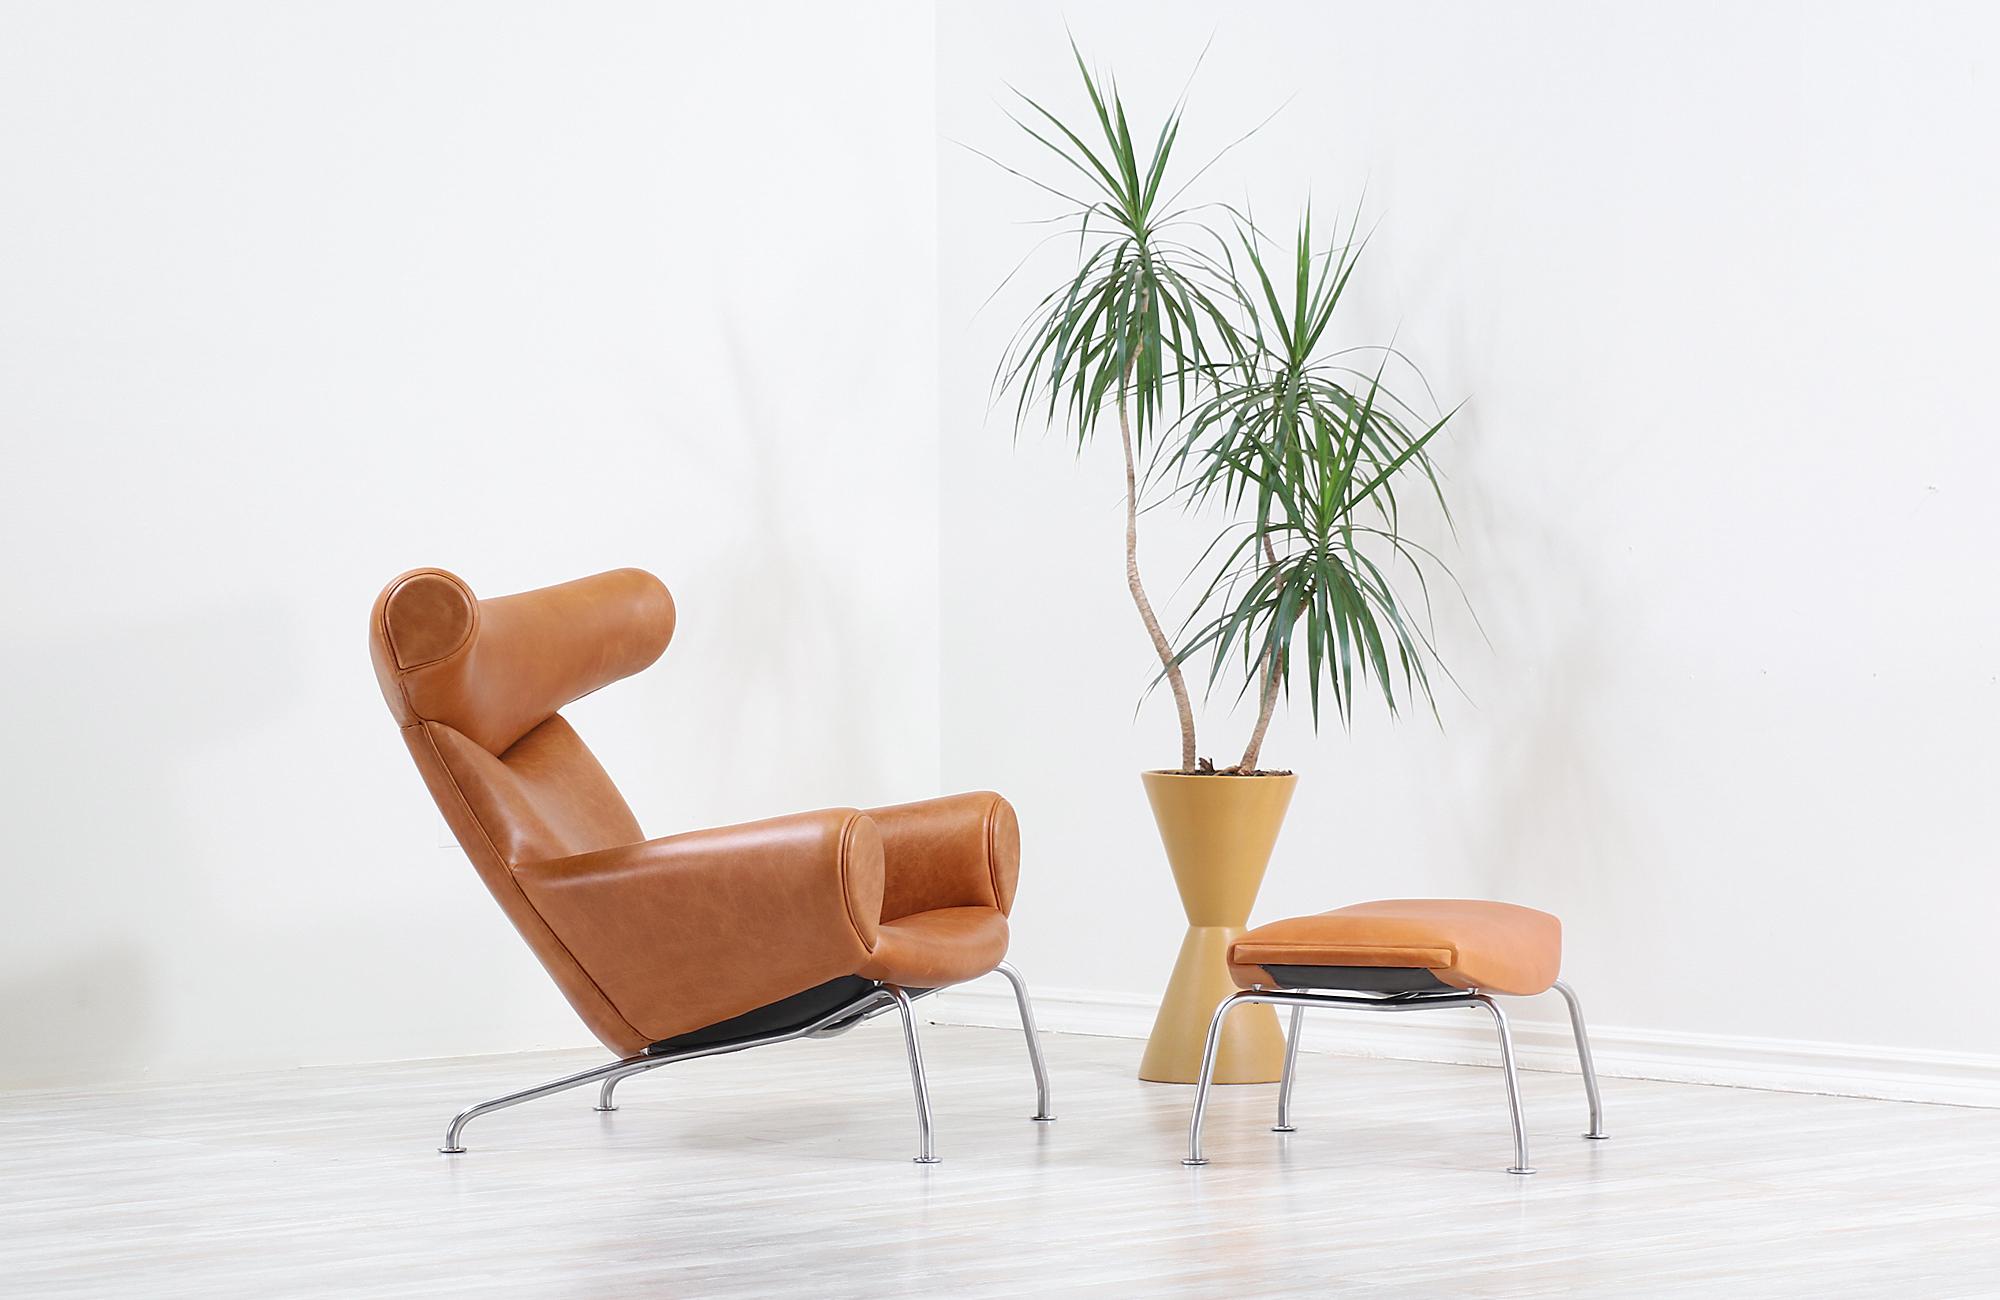 Sculptural modern chair with ottoman model AP-46 designed by Hans J. Wegner for A.P. Stolen in Denmark circa 1960s. This Wegner Classic set epitomizes the designer’s nature ideals and organic aesthetics seen through the blend of quality materials to